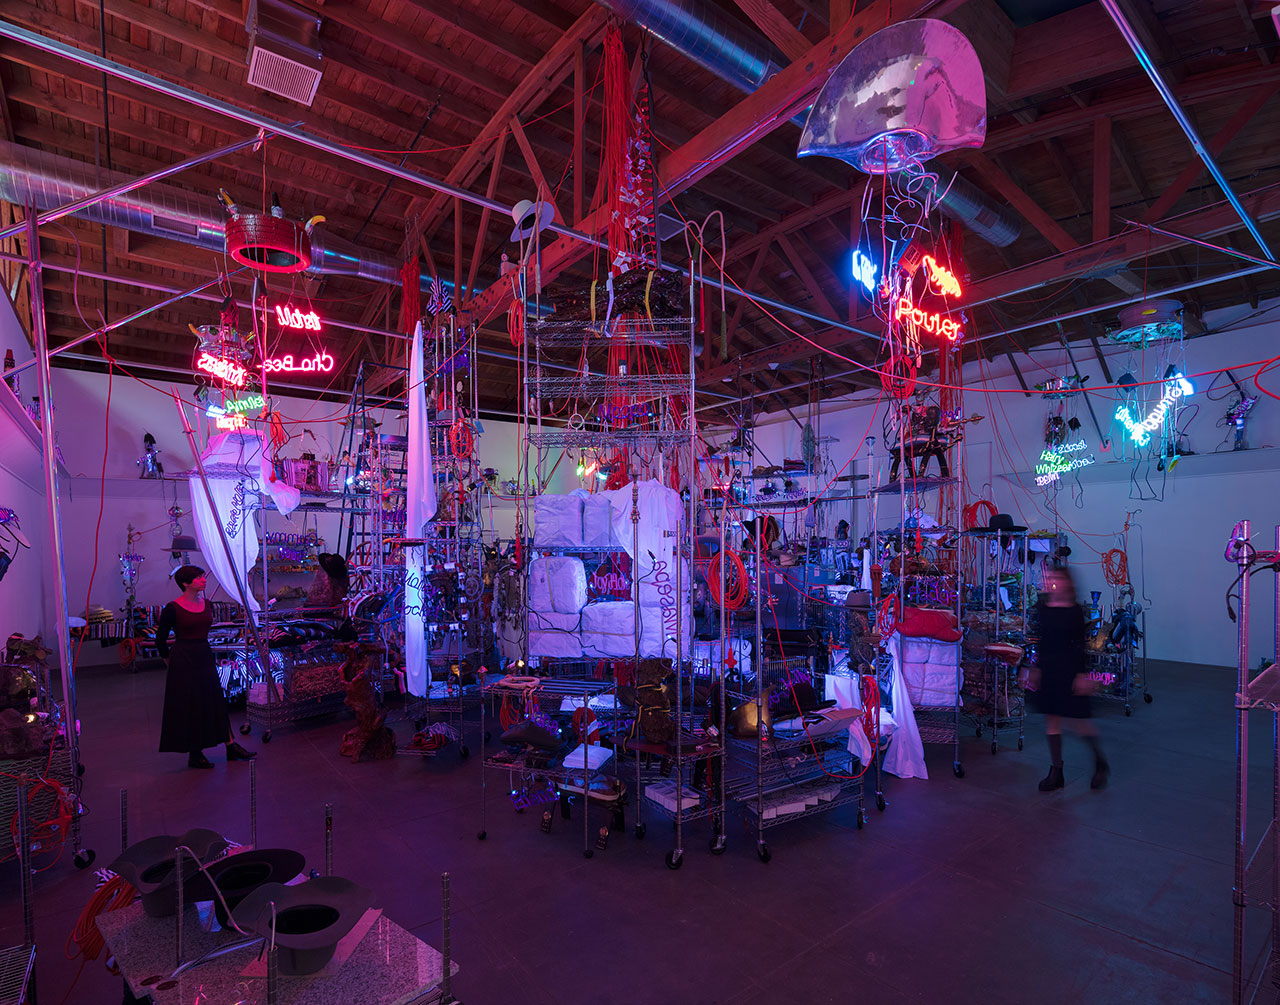 Jason Rhoades, The Black Pussy... and the Pagan Idol Workshop, 2005. Mixed media. Dimensions variable. Installation view, ‘Jason Rhoades. Installations, 1994 – 2006’. Hauser &amp; Wirth Los Angeles, 2017 © The Estate of Jason Rhoades. Courtesy the estate, Hauser &amp; Wirth, David Zwirner and lender. Photo by Fredrik Nilsen.